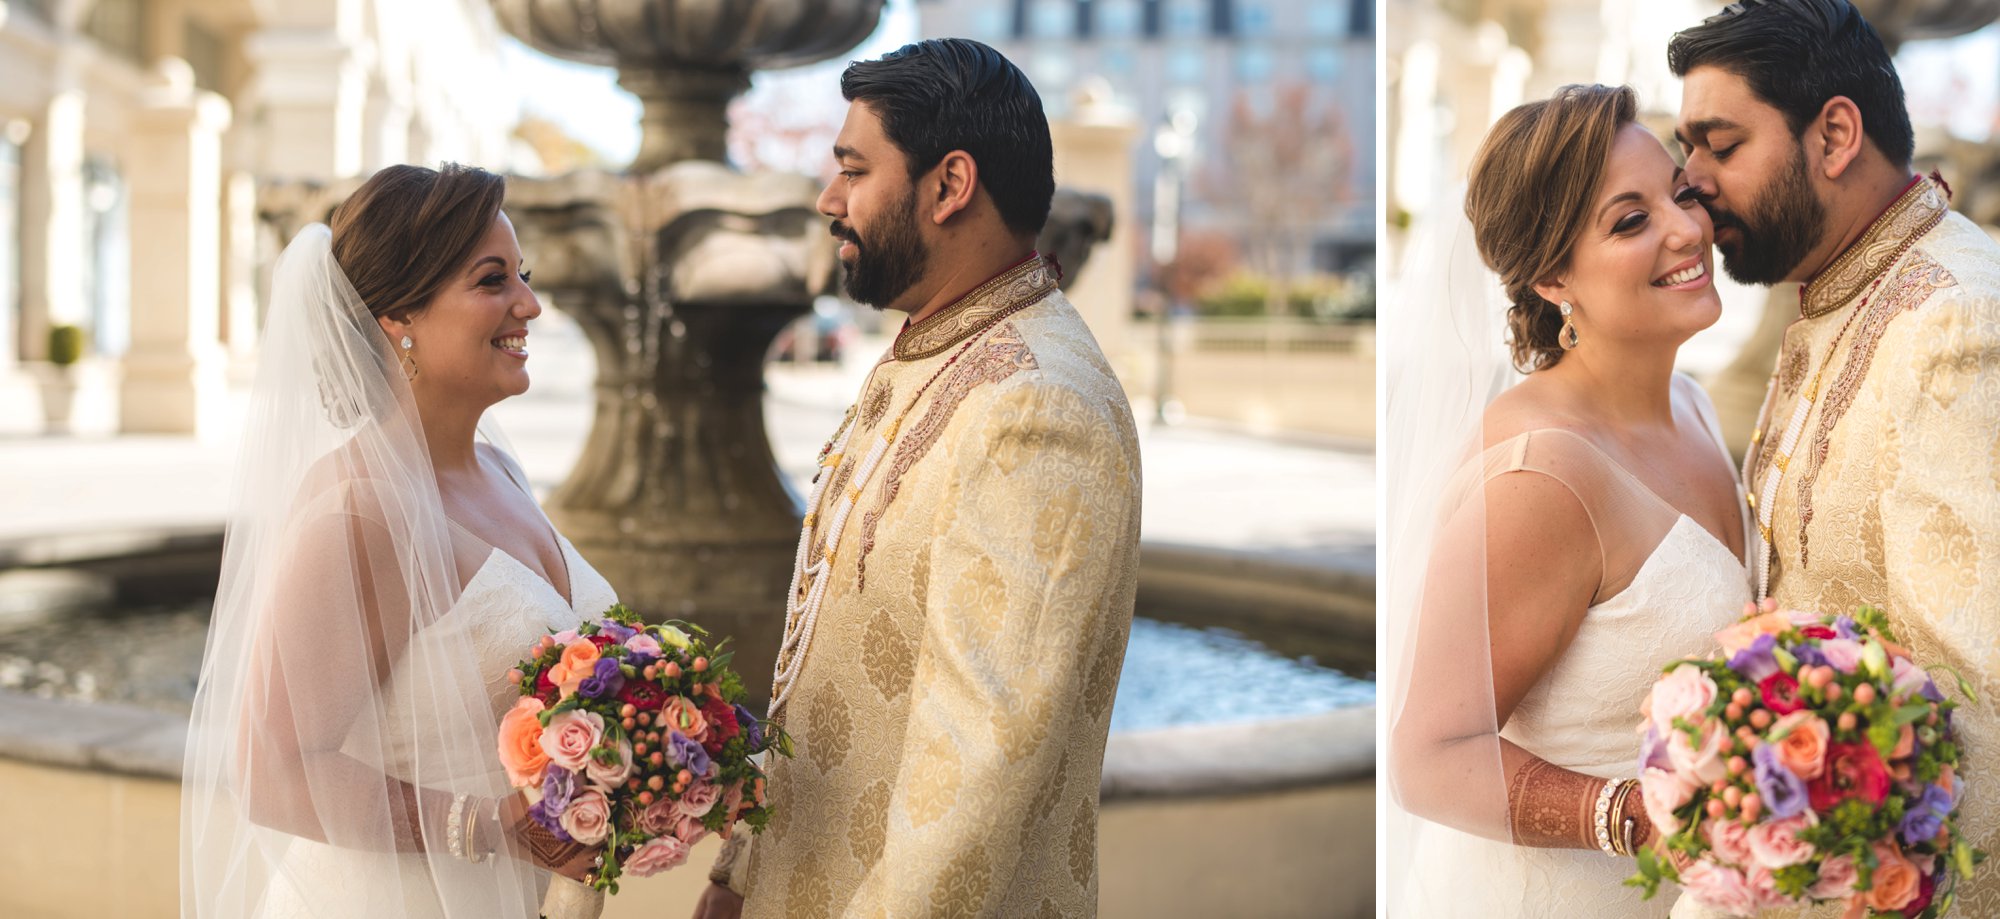 Washington DC colorful Indian wedding with a feminist bride. Outdoor portrait.